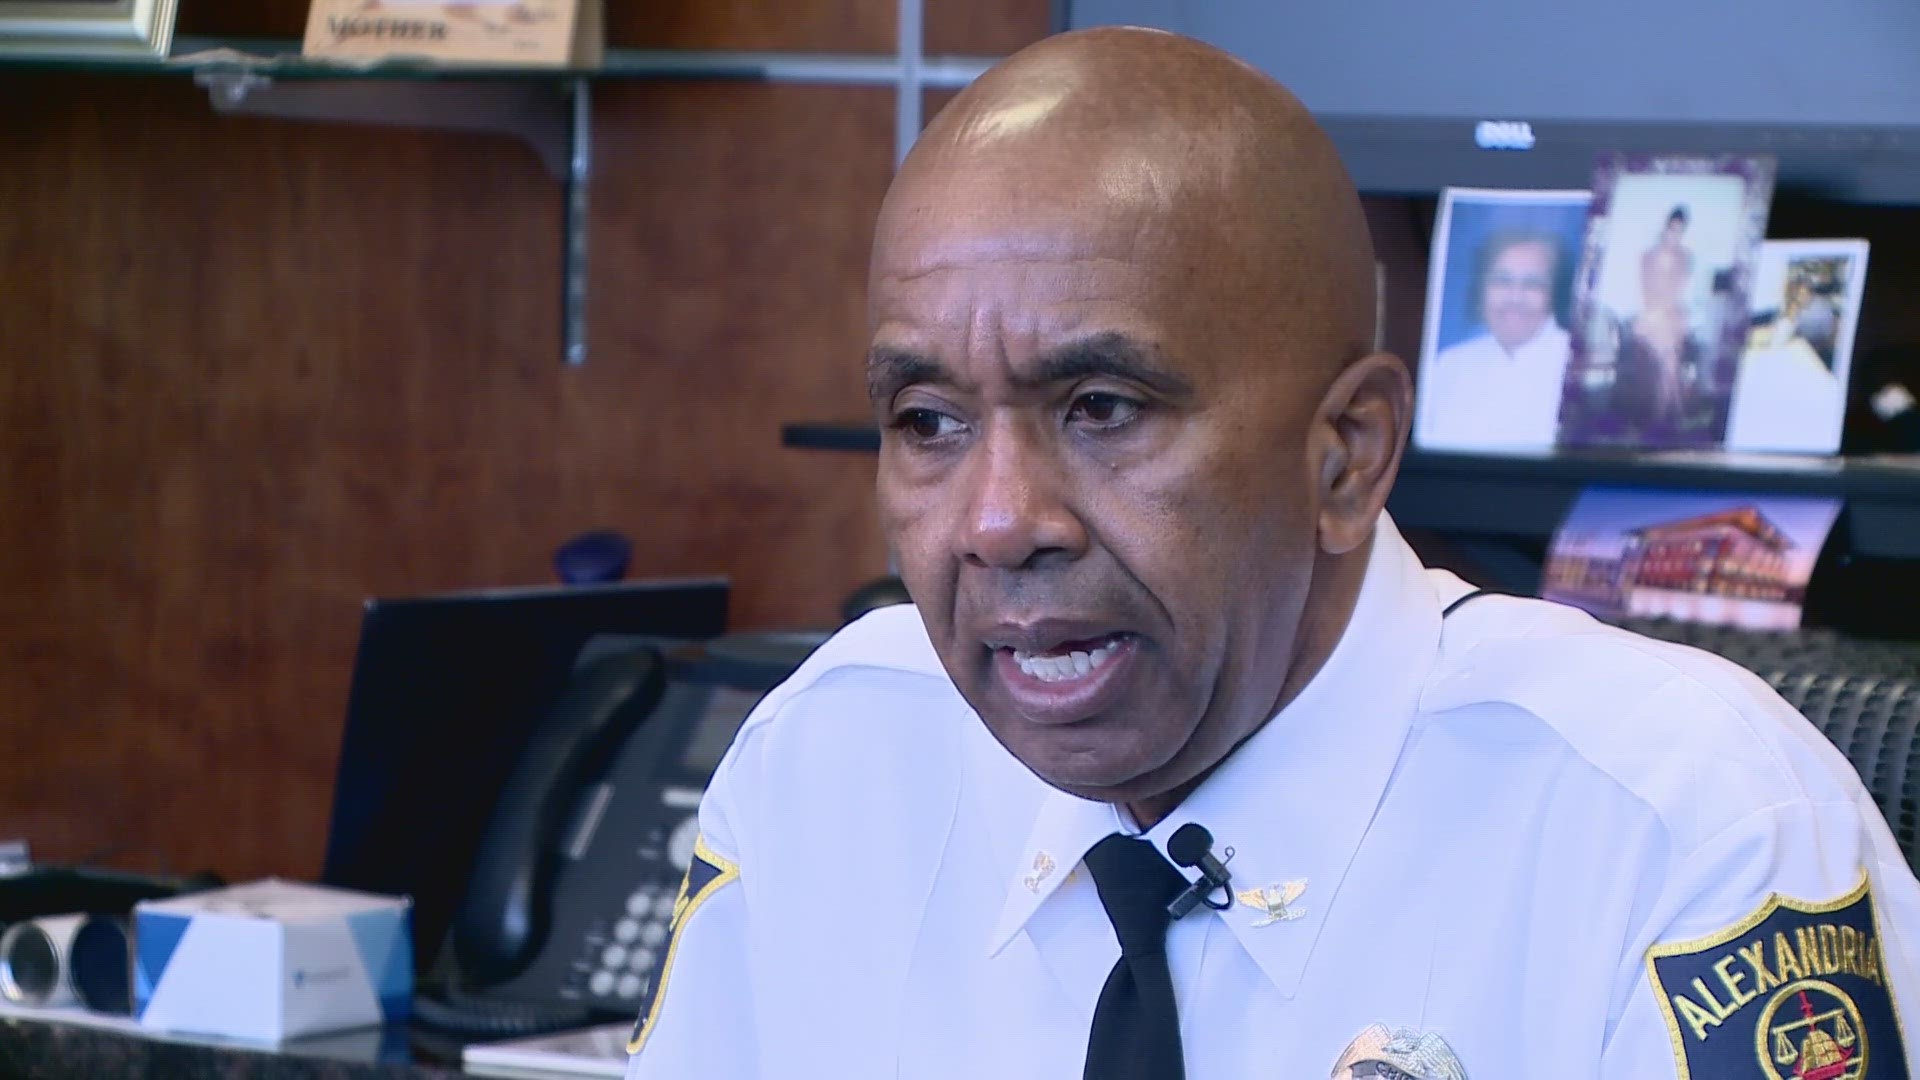 Chief Don Hayes is leaving the Alexandria City Police Department after 44 years to work for the Federal Reserve Board.